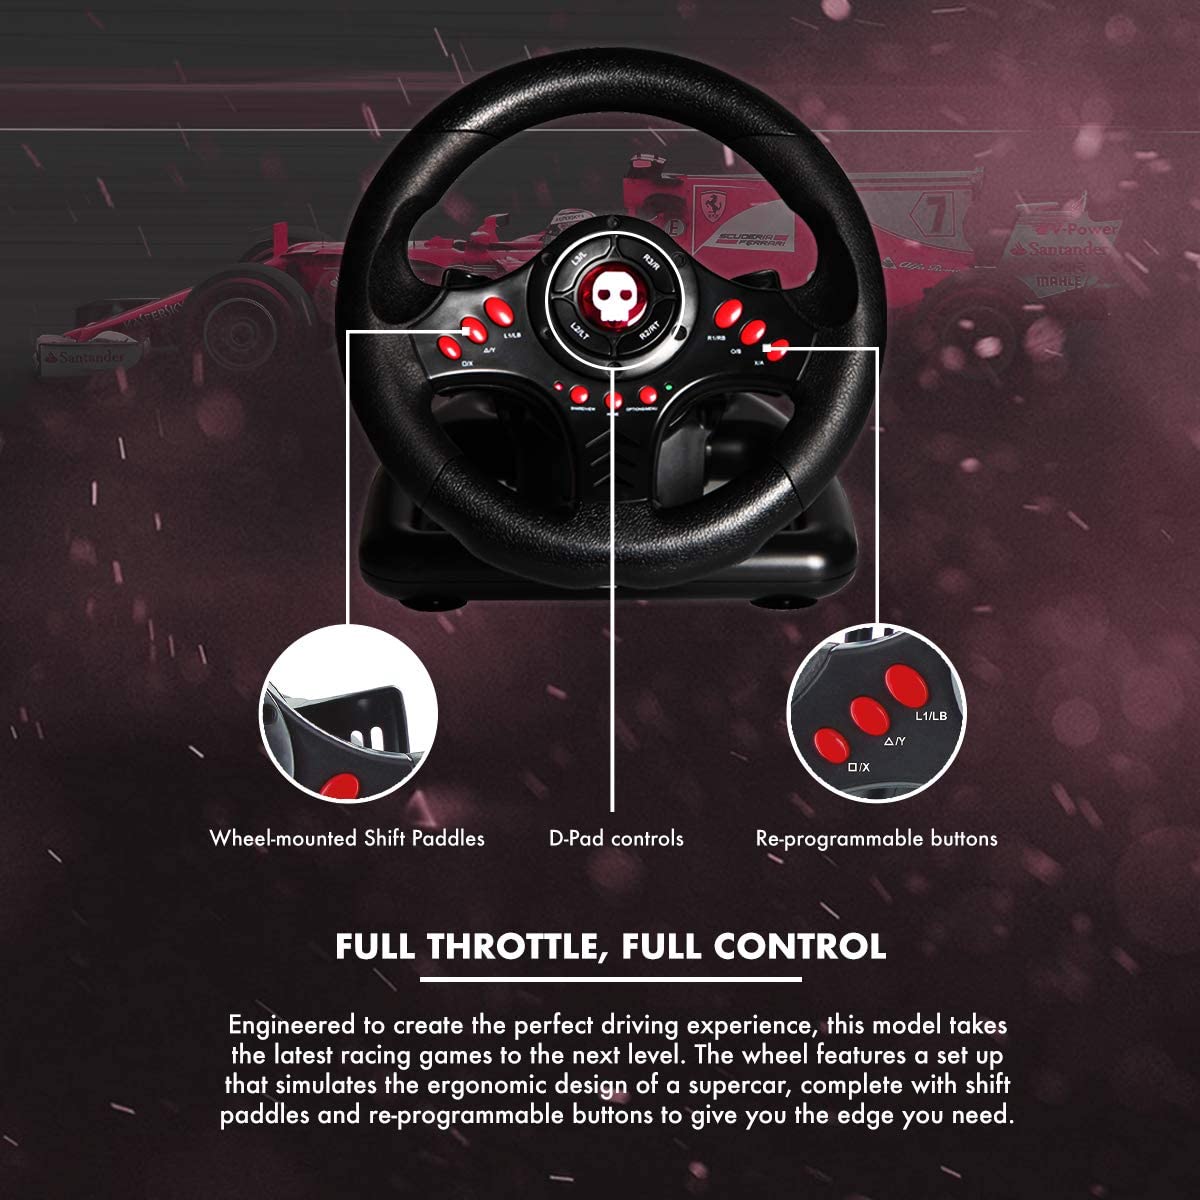 numskull-multi-format-racing-wheel-with-pedals-for-playstation-3-ps4-pc-and-xbox-one-2_1200x1200_81800d3c-252c-435e-bfd6-fb2699b97464